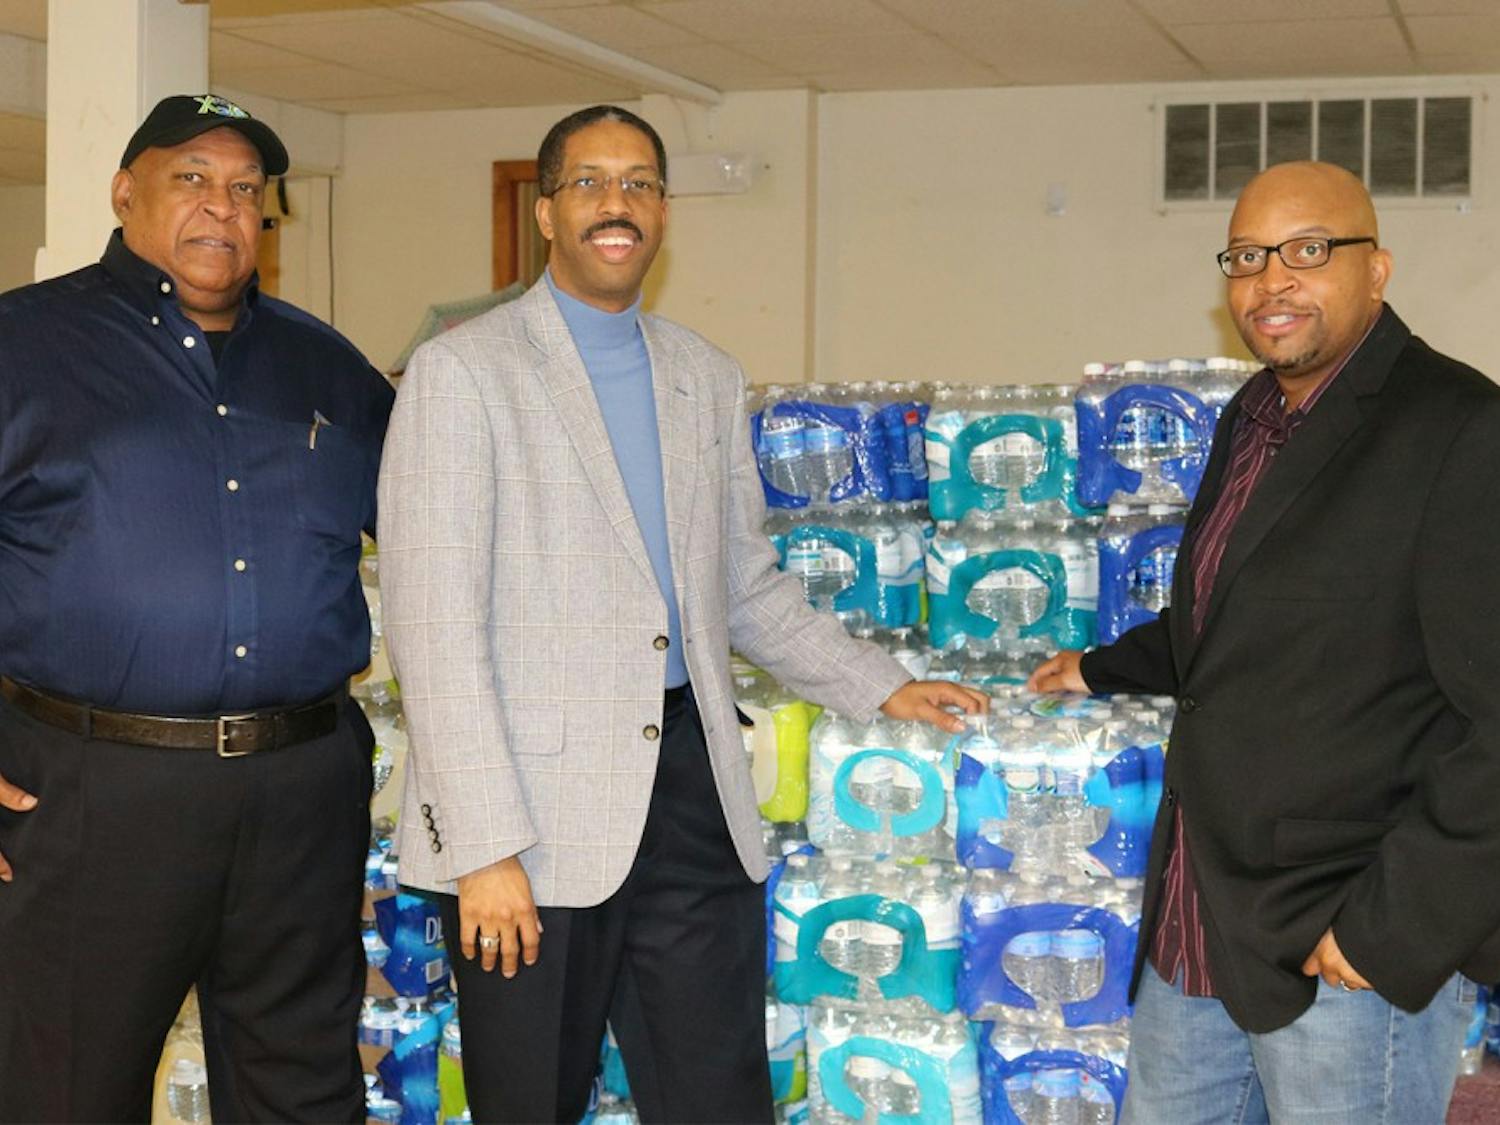 [left to right] Ken Davis, Jace Cox, and Reverend Coleman are collecting donations of bottled water.